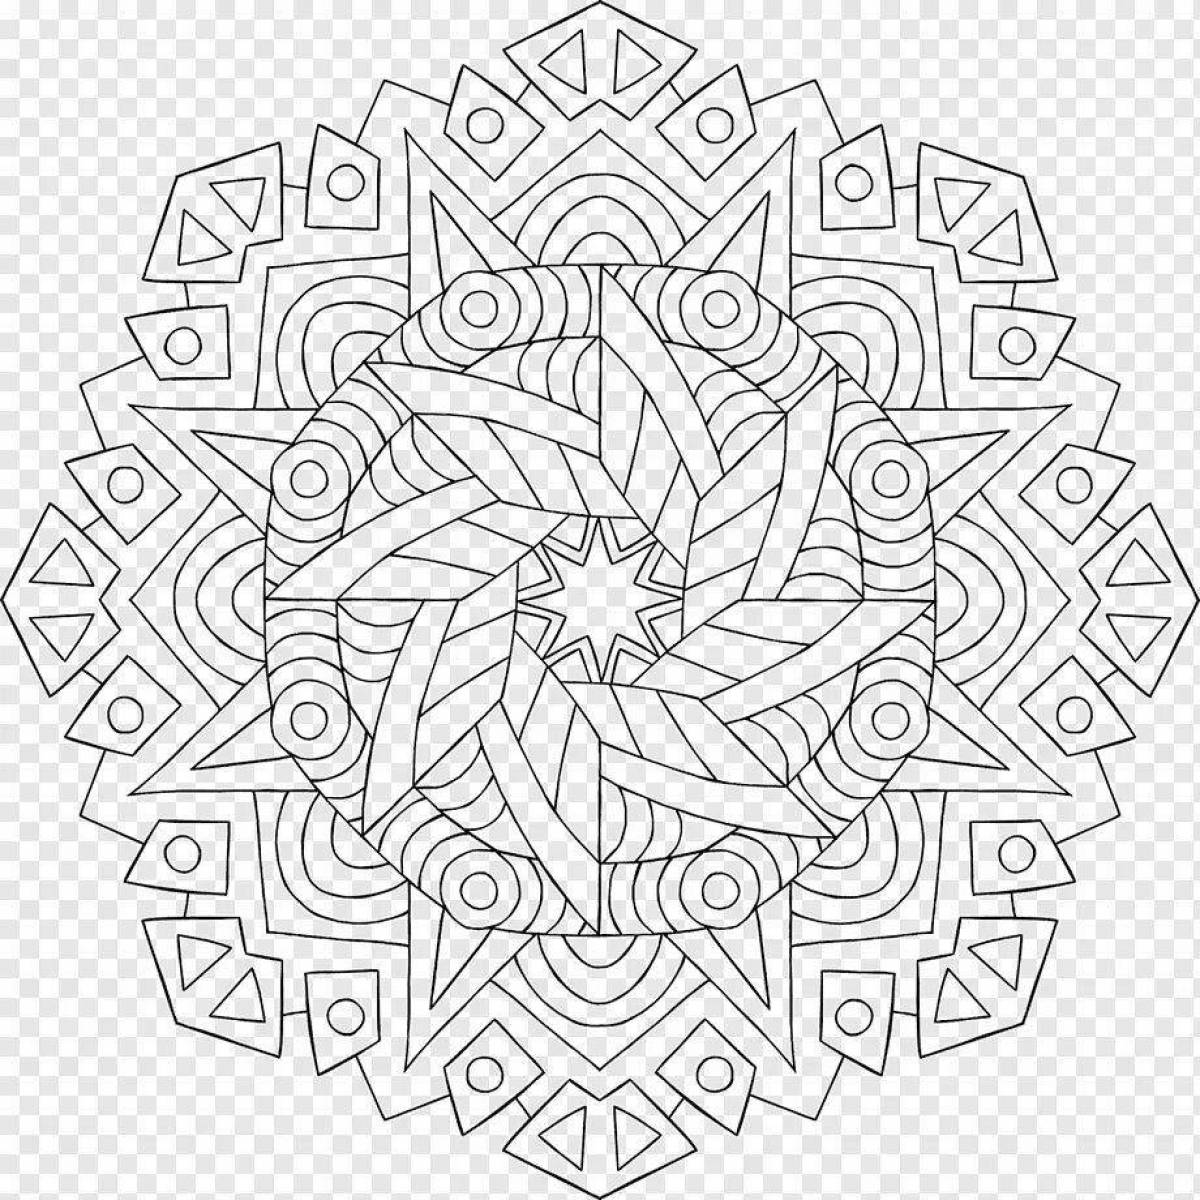 Colorful coloring mandala for good luck